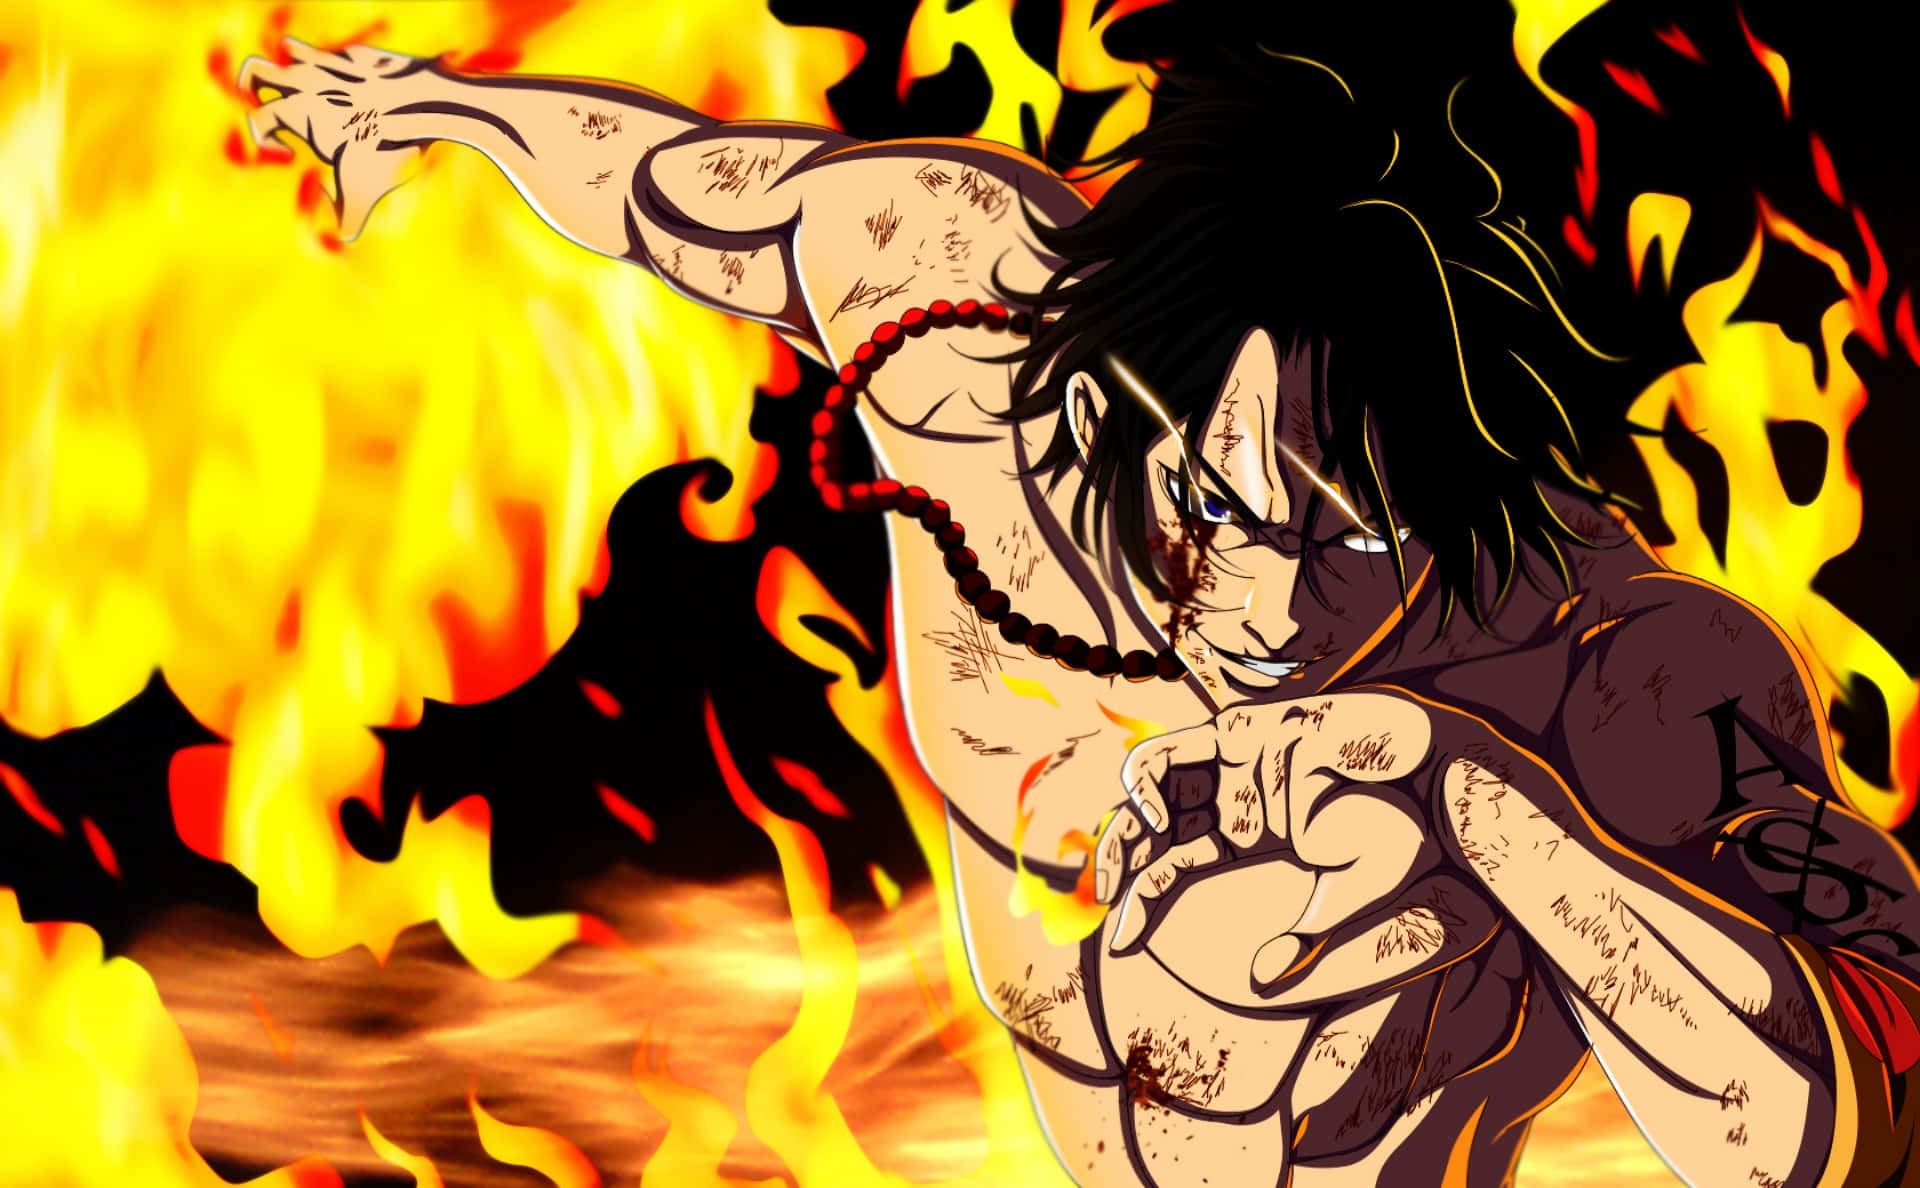 Portgas D Ace, Legendary Pirate of the One Piece Universe Wallpaper